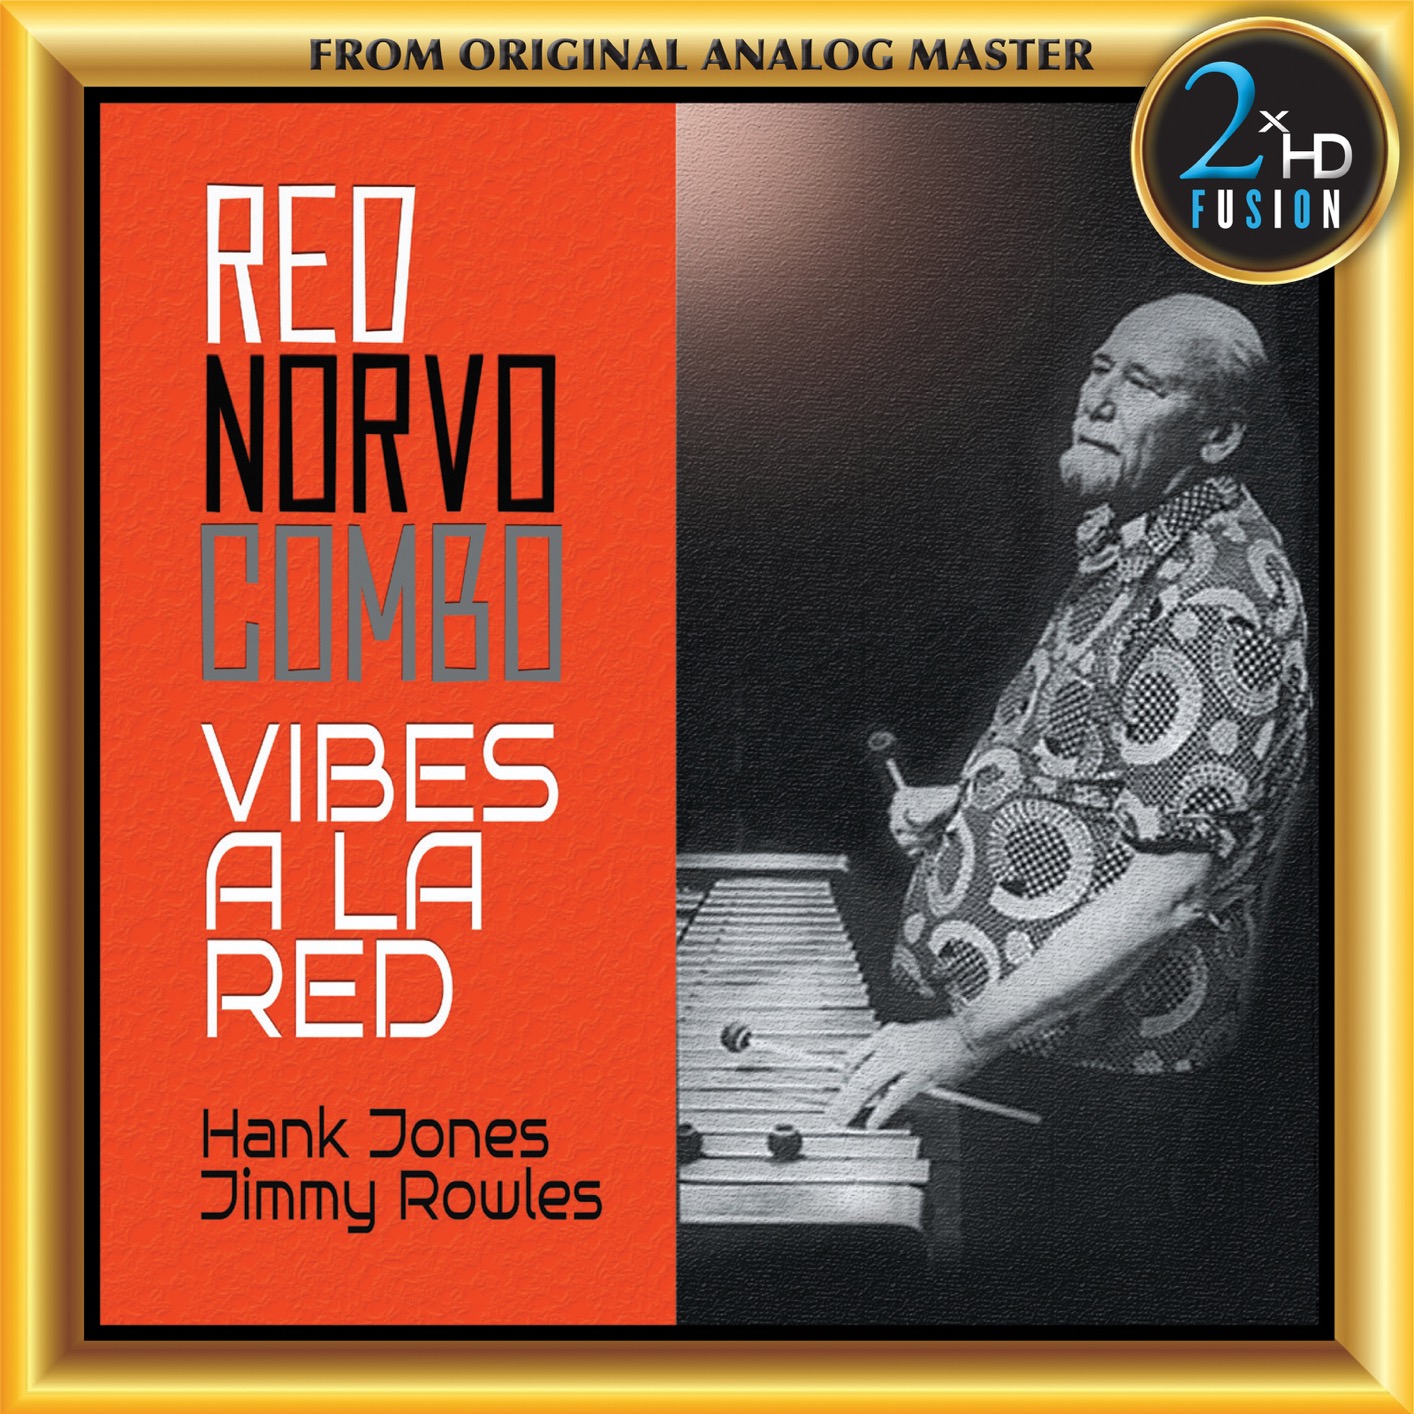 Red Norvo Combo, Hank Jones, Jimmy Rowles – Vibes a la Red (Remastered) (2018) [Official Digital Download 24bit/192kHz]